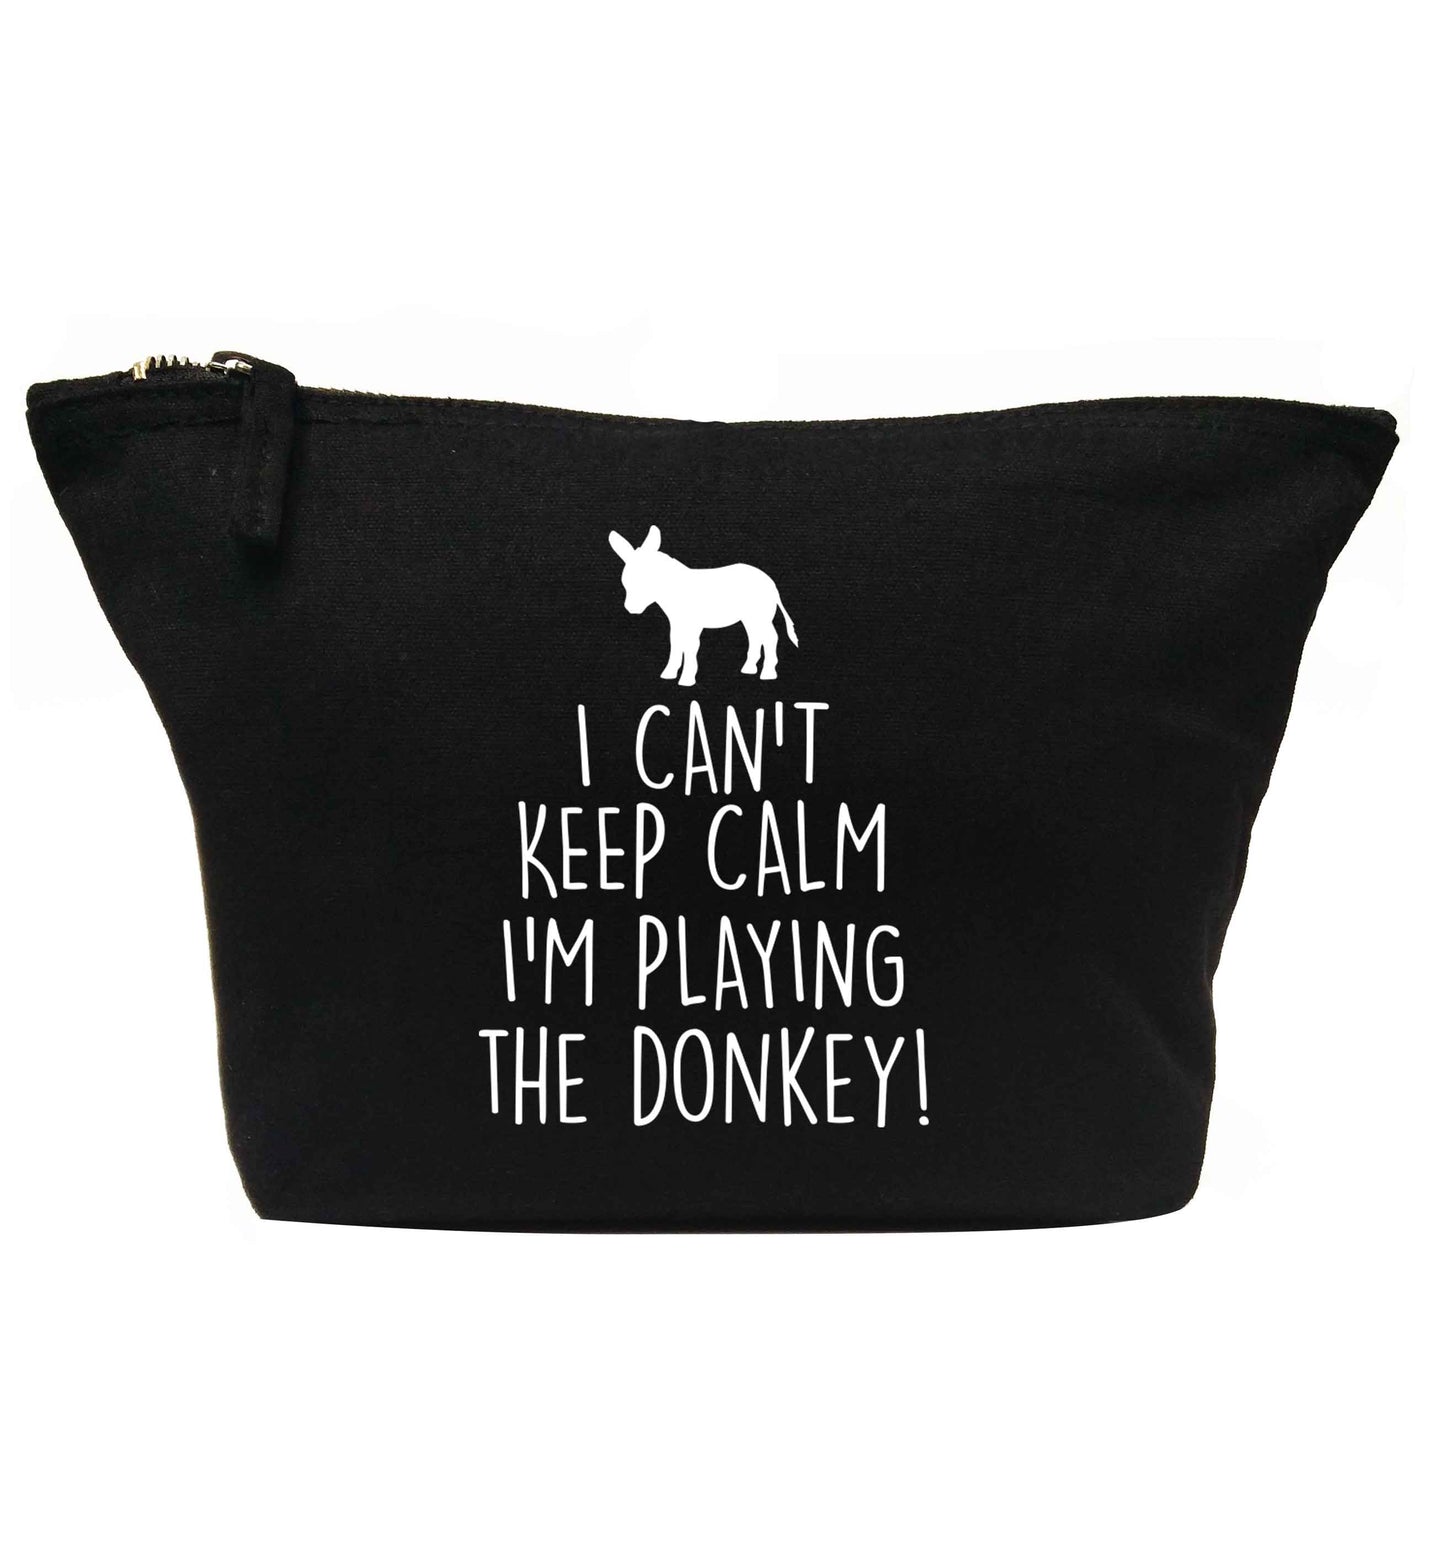 I can't keep calm I'm playing the donkey! | makeup / wash bag